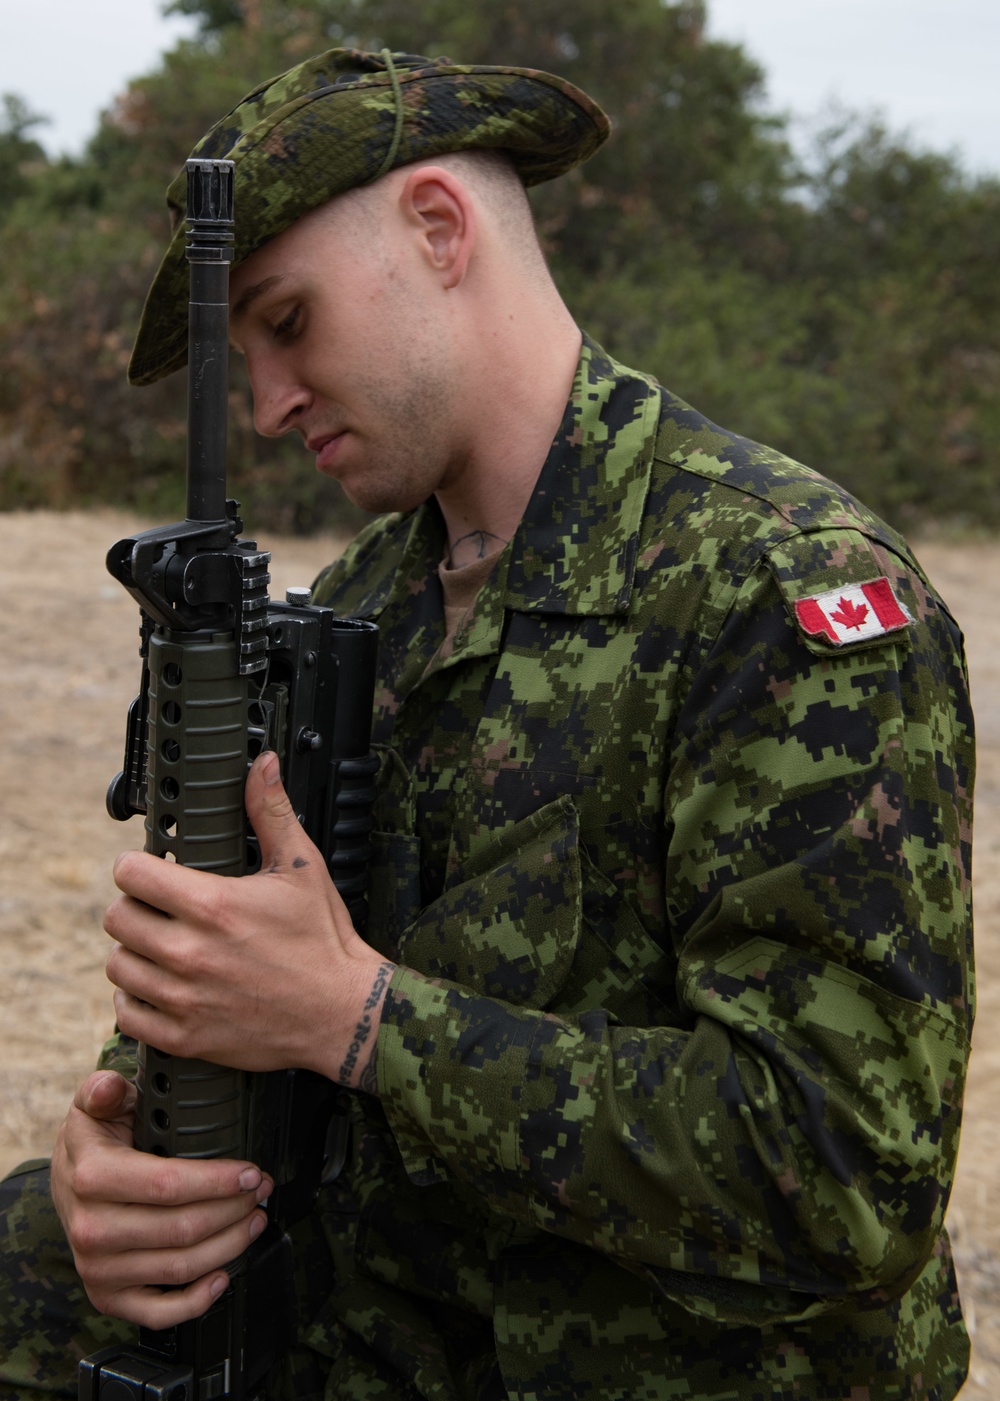 Canadian Armed Forces prepare for Exercise Rim of the Pacific at Camp Pendleton